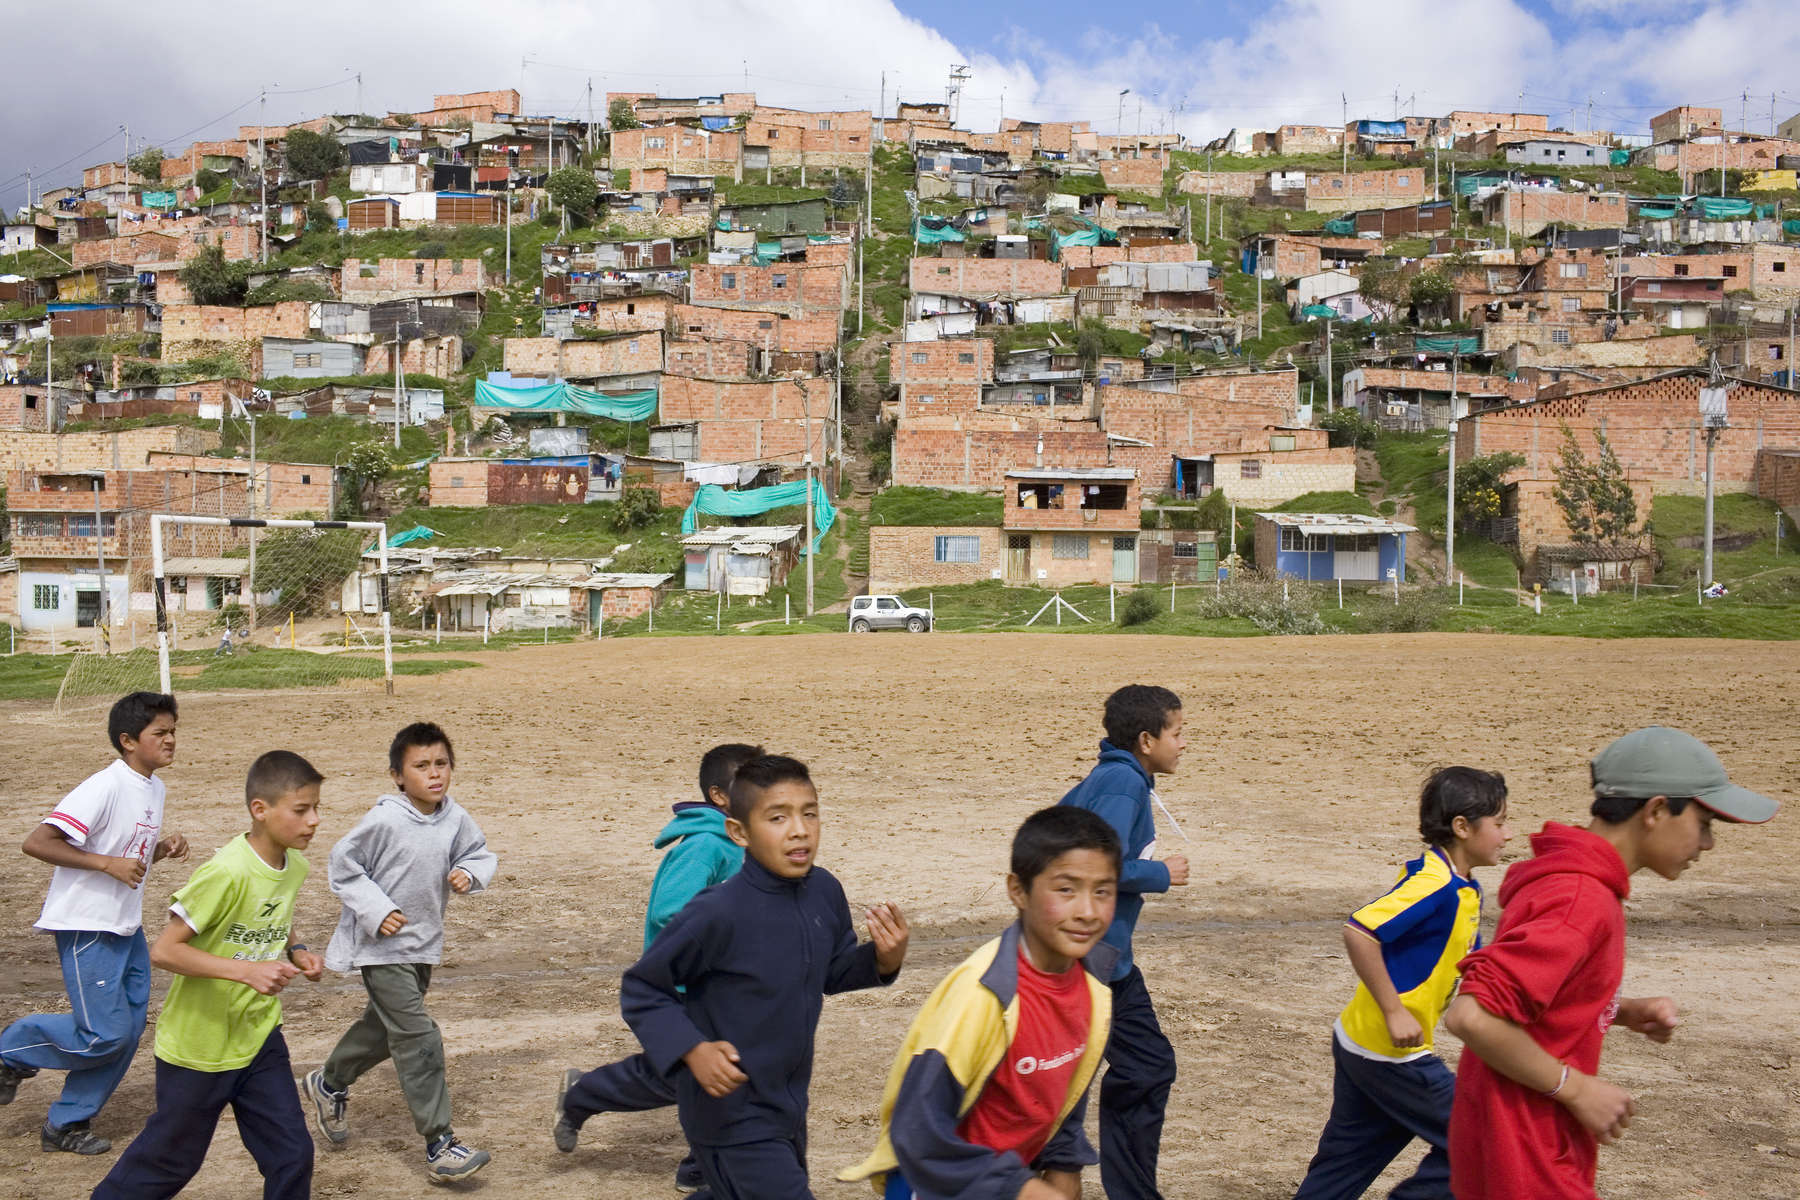 Children on the 'Goals For a Better Life' football programme train on a pitch at the foot of a slum on the outskirts of Bogota. Run by the 'Colombianito's' charity, it aims to use the kids passion for football to keep them in school and away from street gangs.In disaster areas, war zones and urban wastelands, football keeps humanity alive. It brings nations together and promotes unity. It encourages equality and generates pride and self-belief. It has the power to heal and to help, to motivate, to give freedom to dreams and empower a generation. There are millions of people playing the game or helping it to flourish who find that football brings a positive dimension to their lives.Away from the billionaire owned clubs with it's multi-million dollar players, Football's Hidden Story is a series of emotive human interest photographs showing the positive impact football has had at grassroot level on individuals and communities all around the world. 